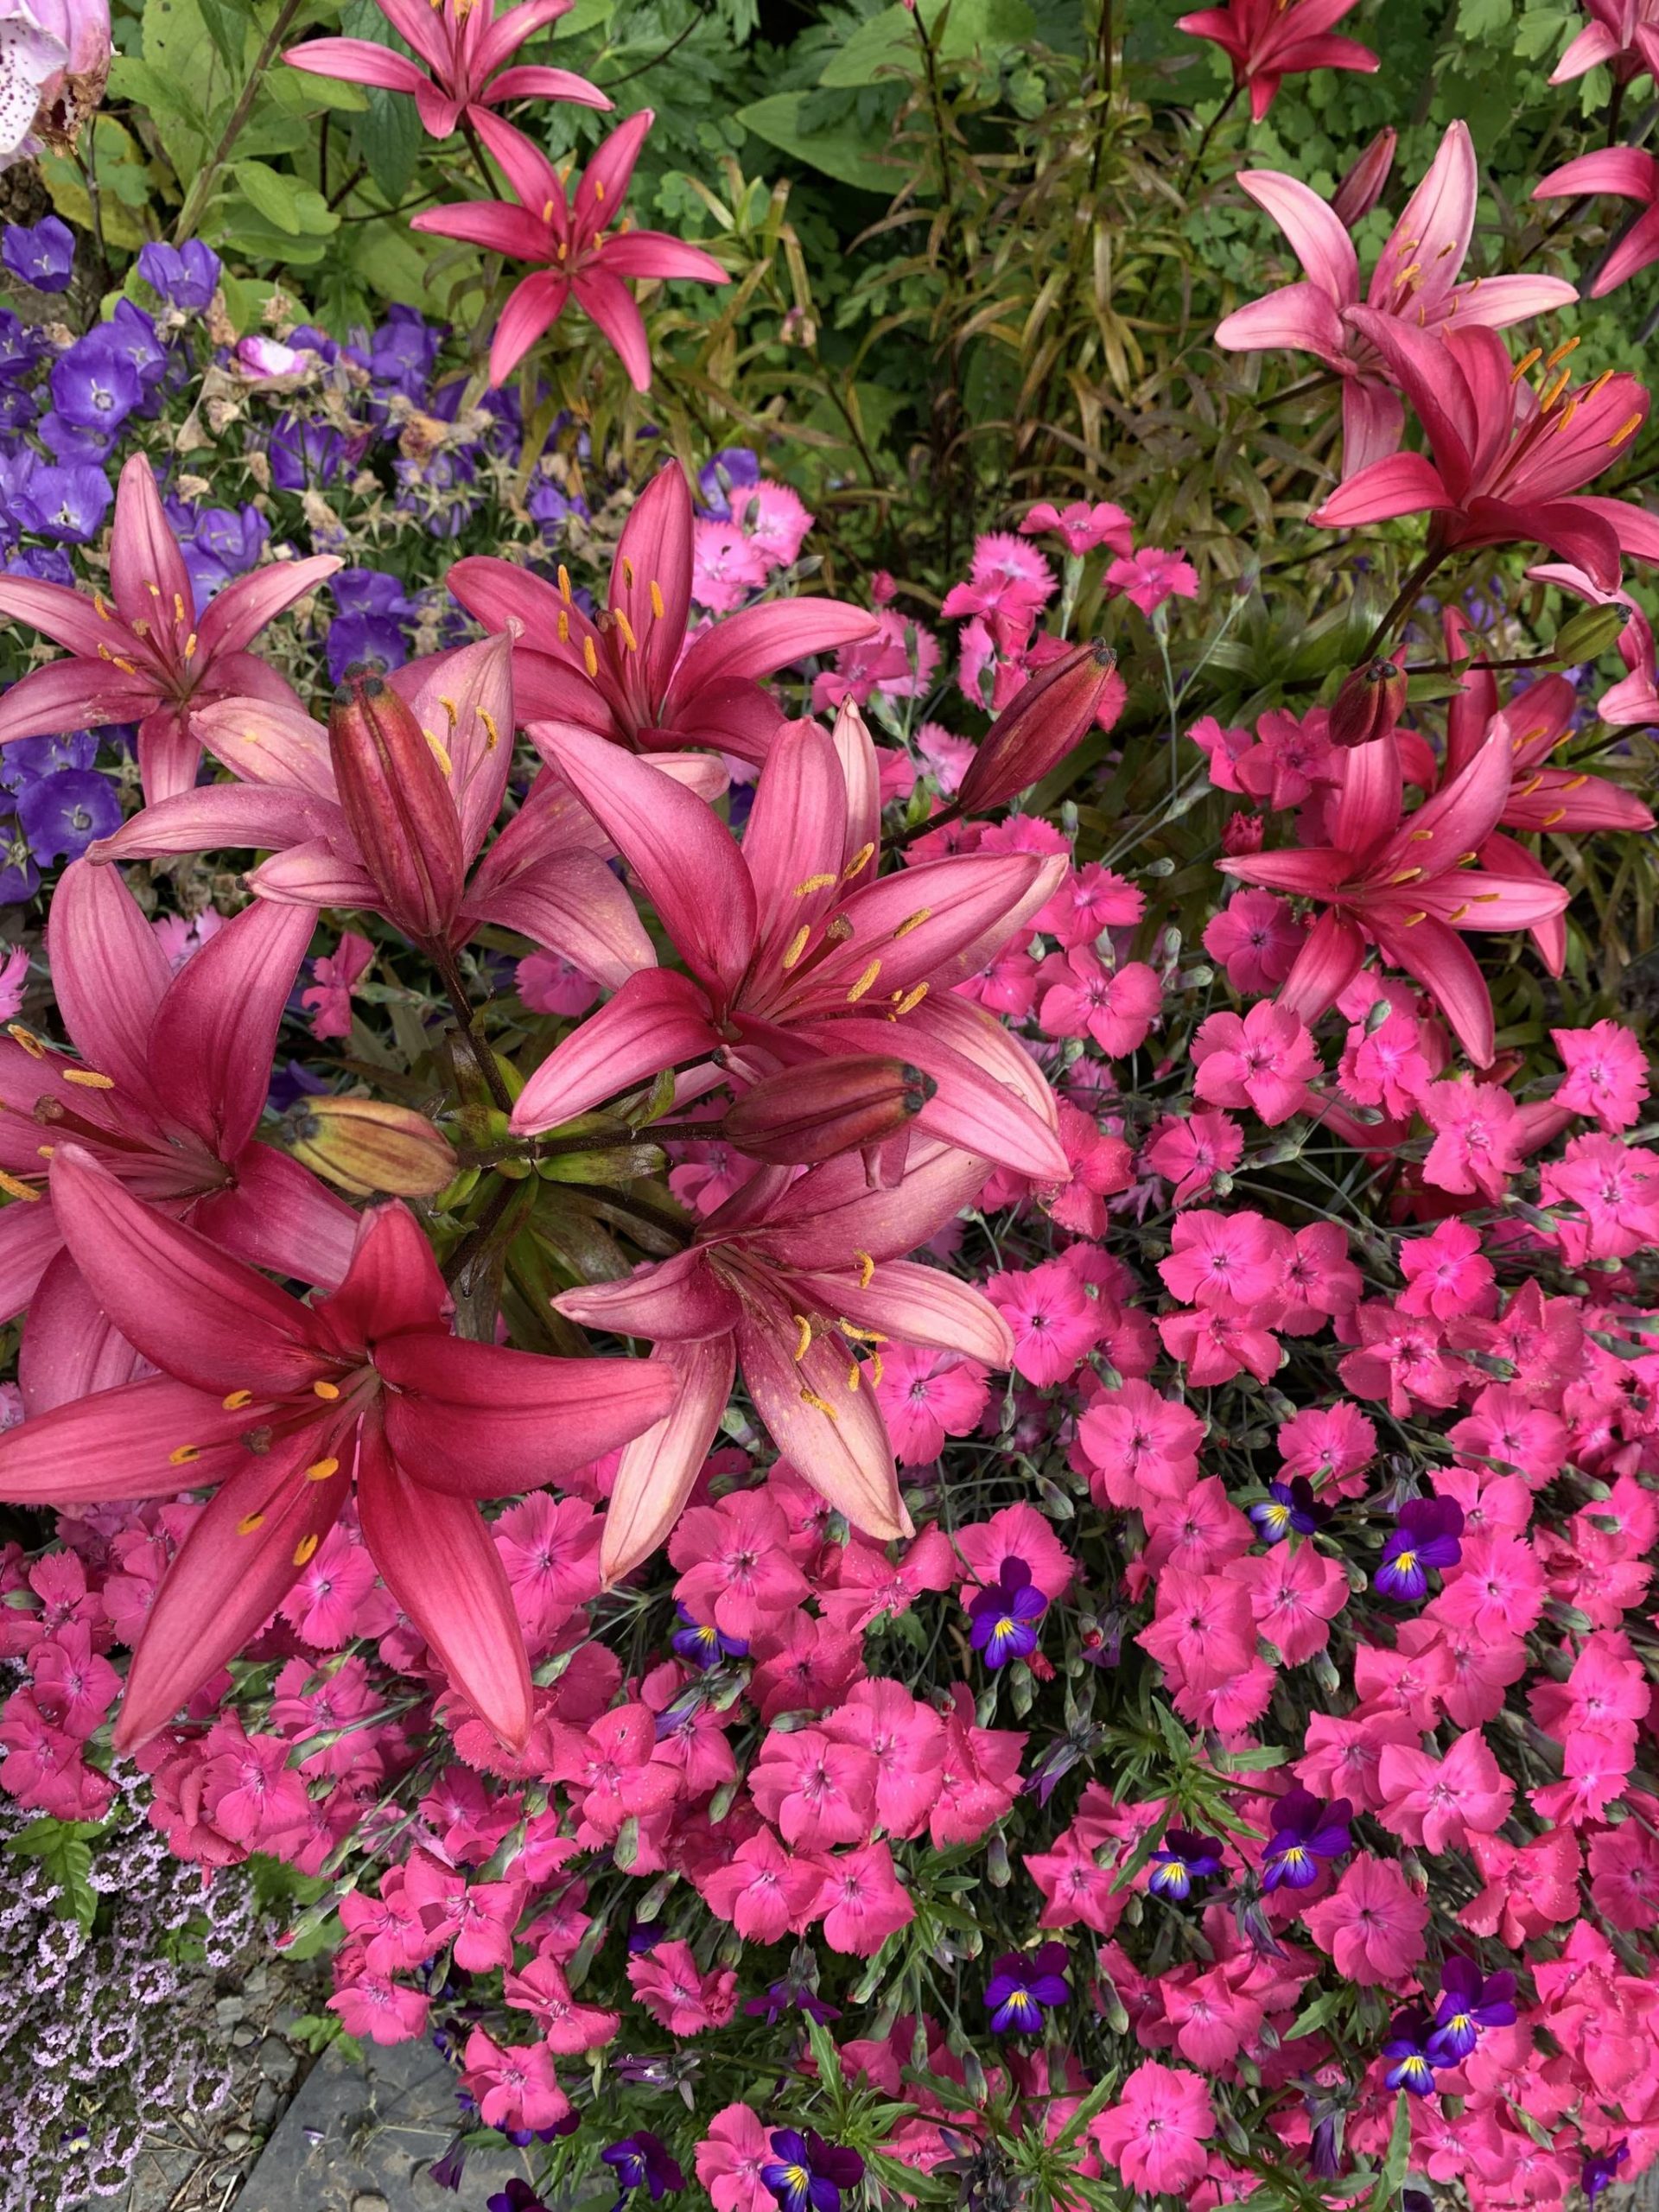 Lilies, dianthus “Cheddar Pink,” Johnny-jump-ups, thyme and campanula carpatica “Blue Clips” bloom on July 31, 2020, at the Kachemak Gardener’s garden in Homer, Alaska. (Photo by Rosemary Fitzpatrick)